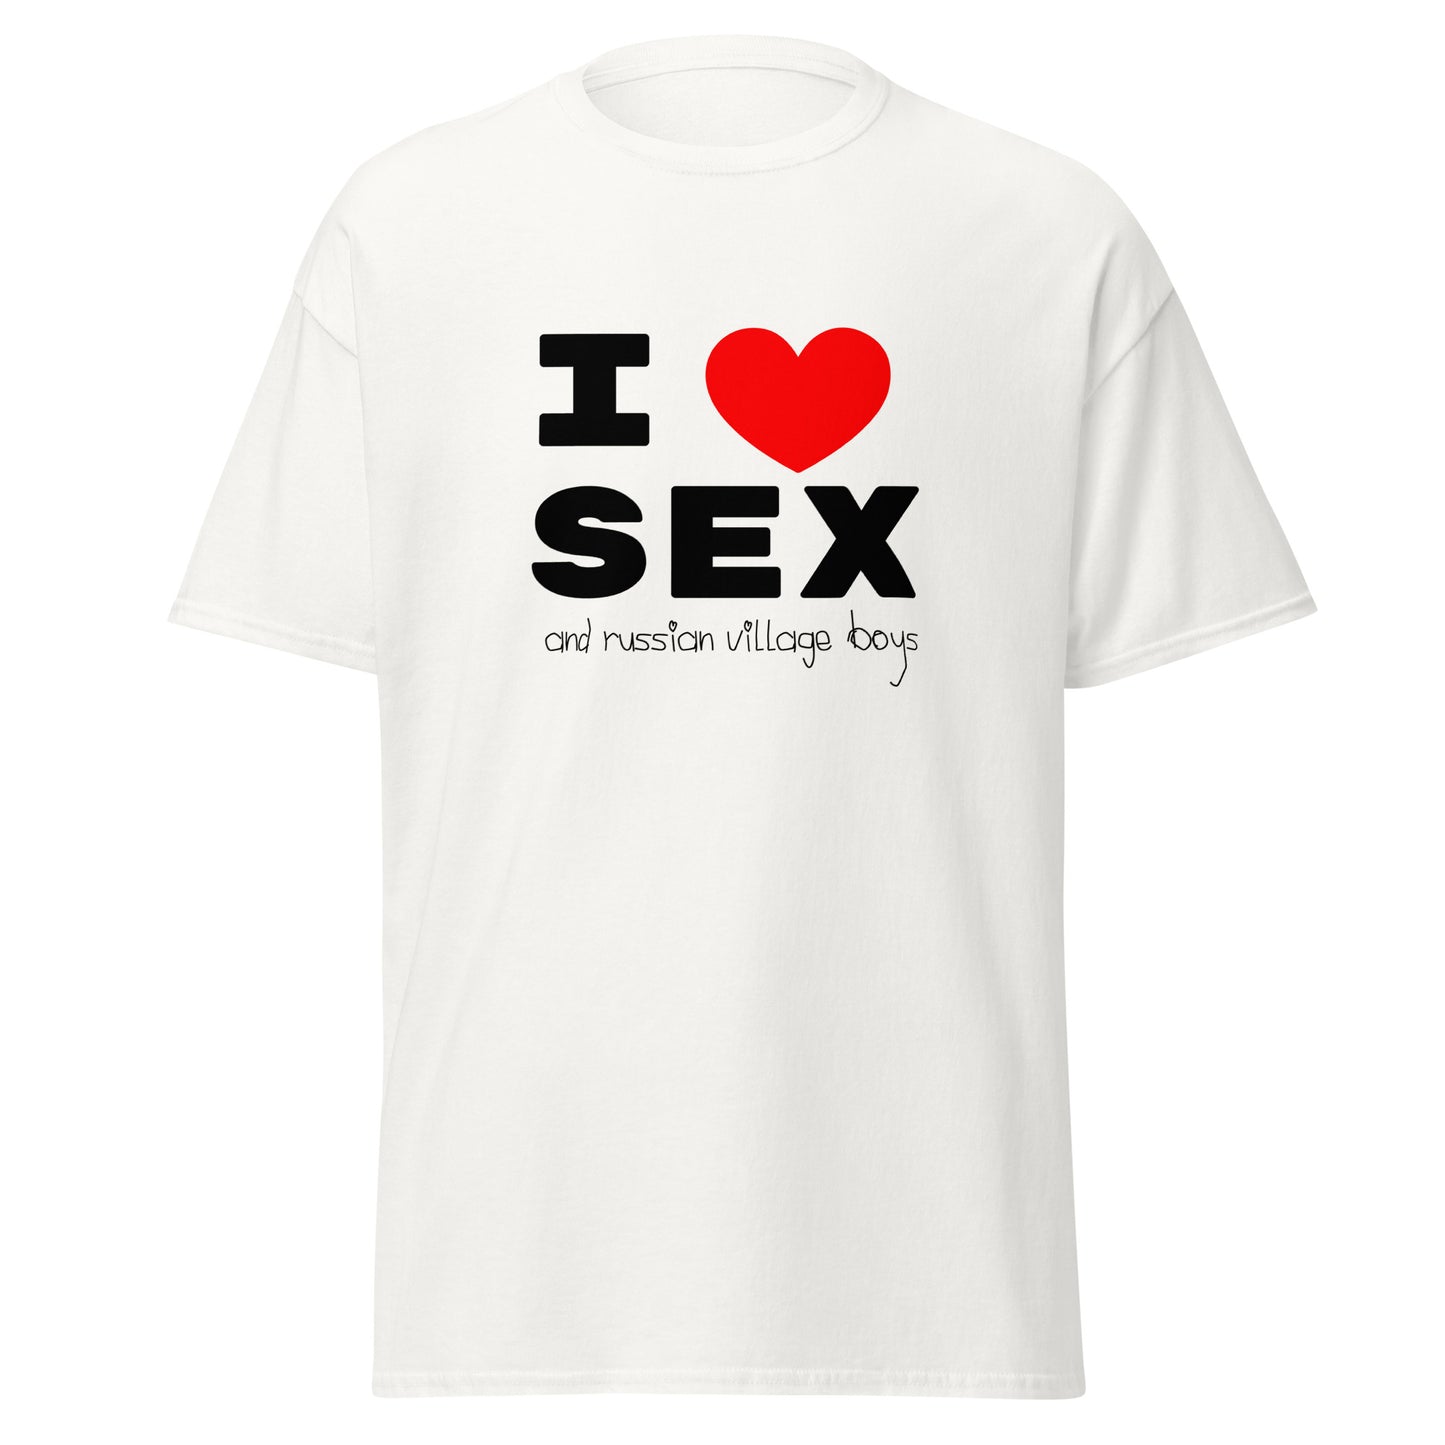 I love sex and russian village boys T-shirt